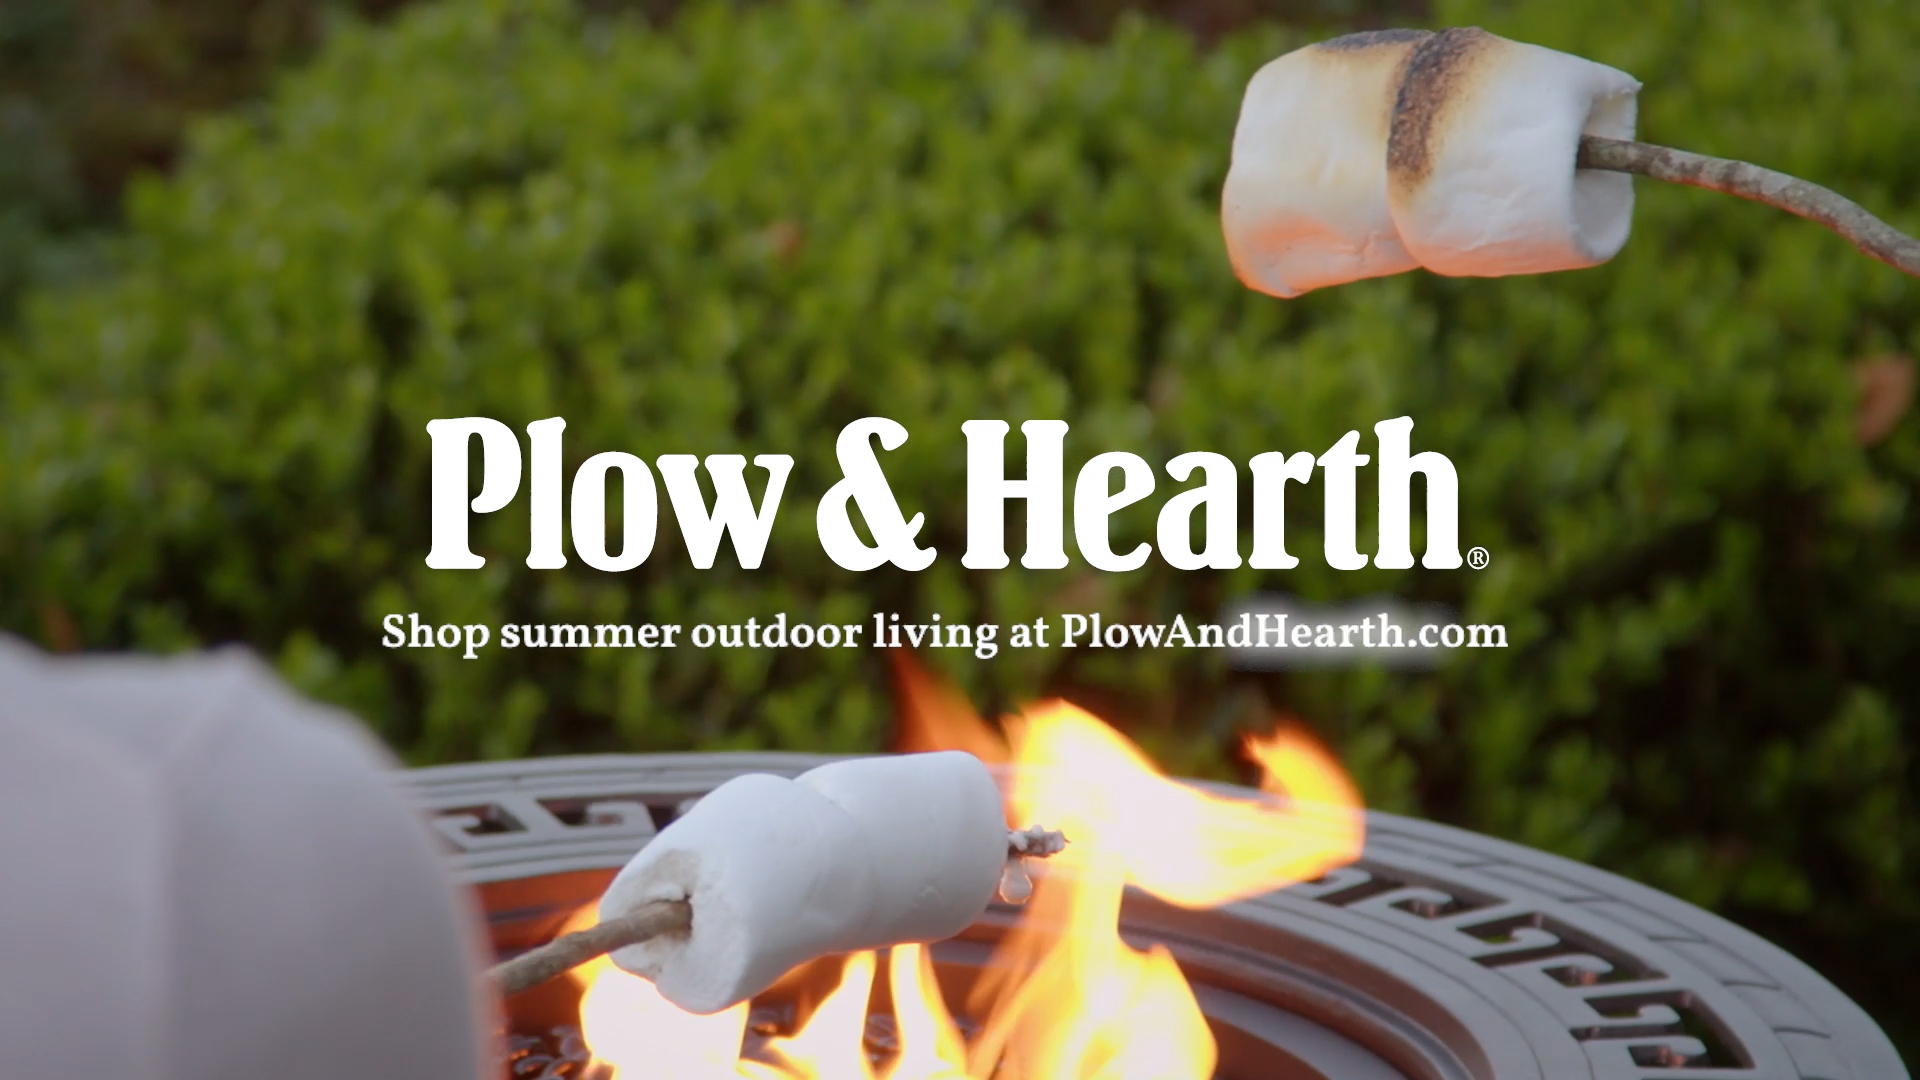 Plow & Hearth National Television Commercial "P&H."